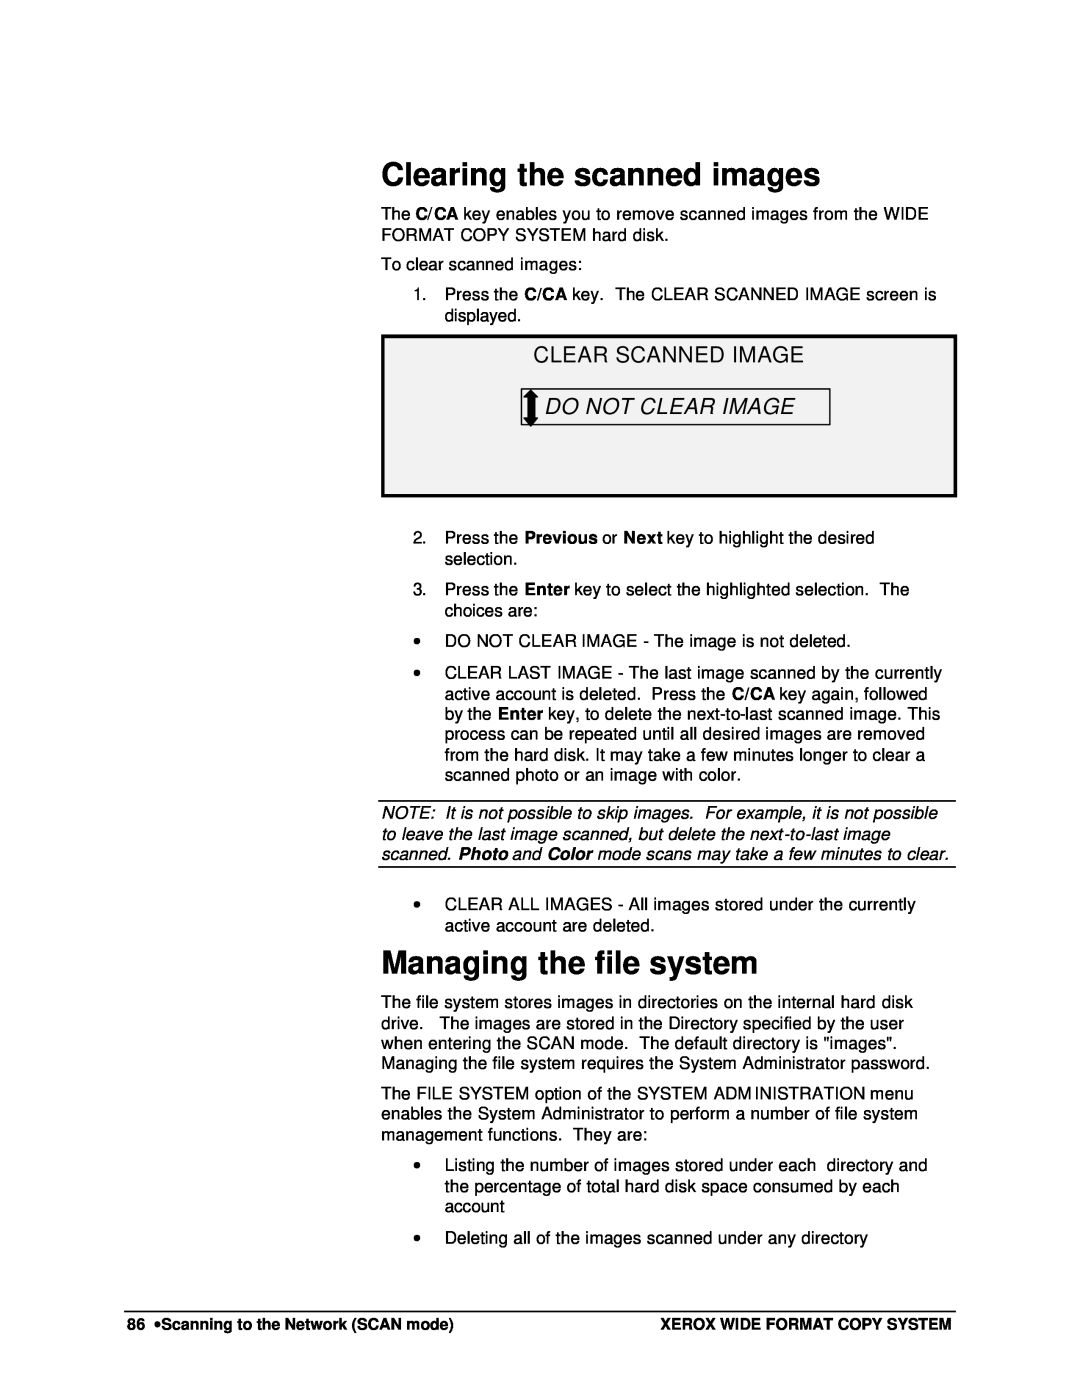 Xerox 8825, 8850, 8830, X2 Clearing the scanned images, Managing the file system, Clear Scanned Image, Do Not Clear Image 